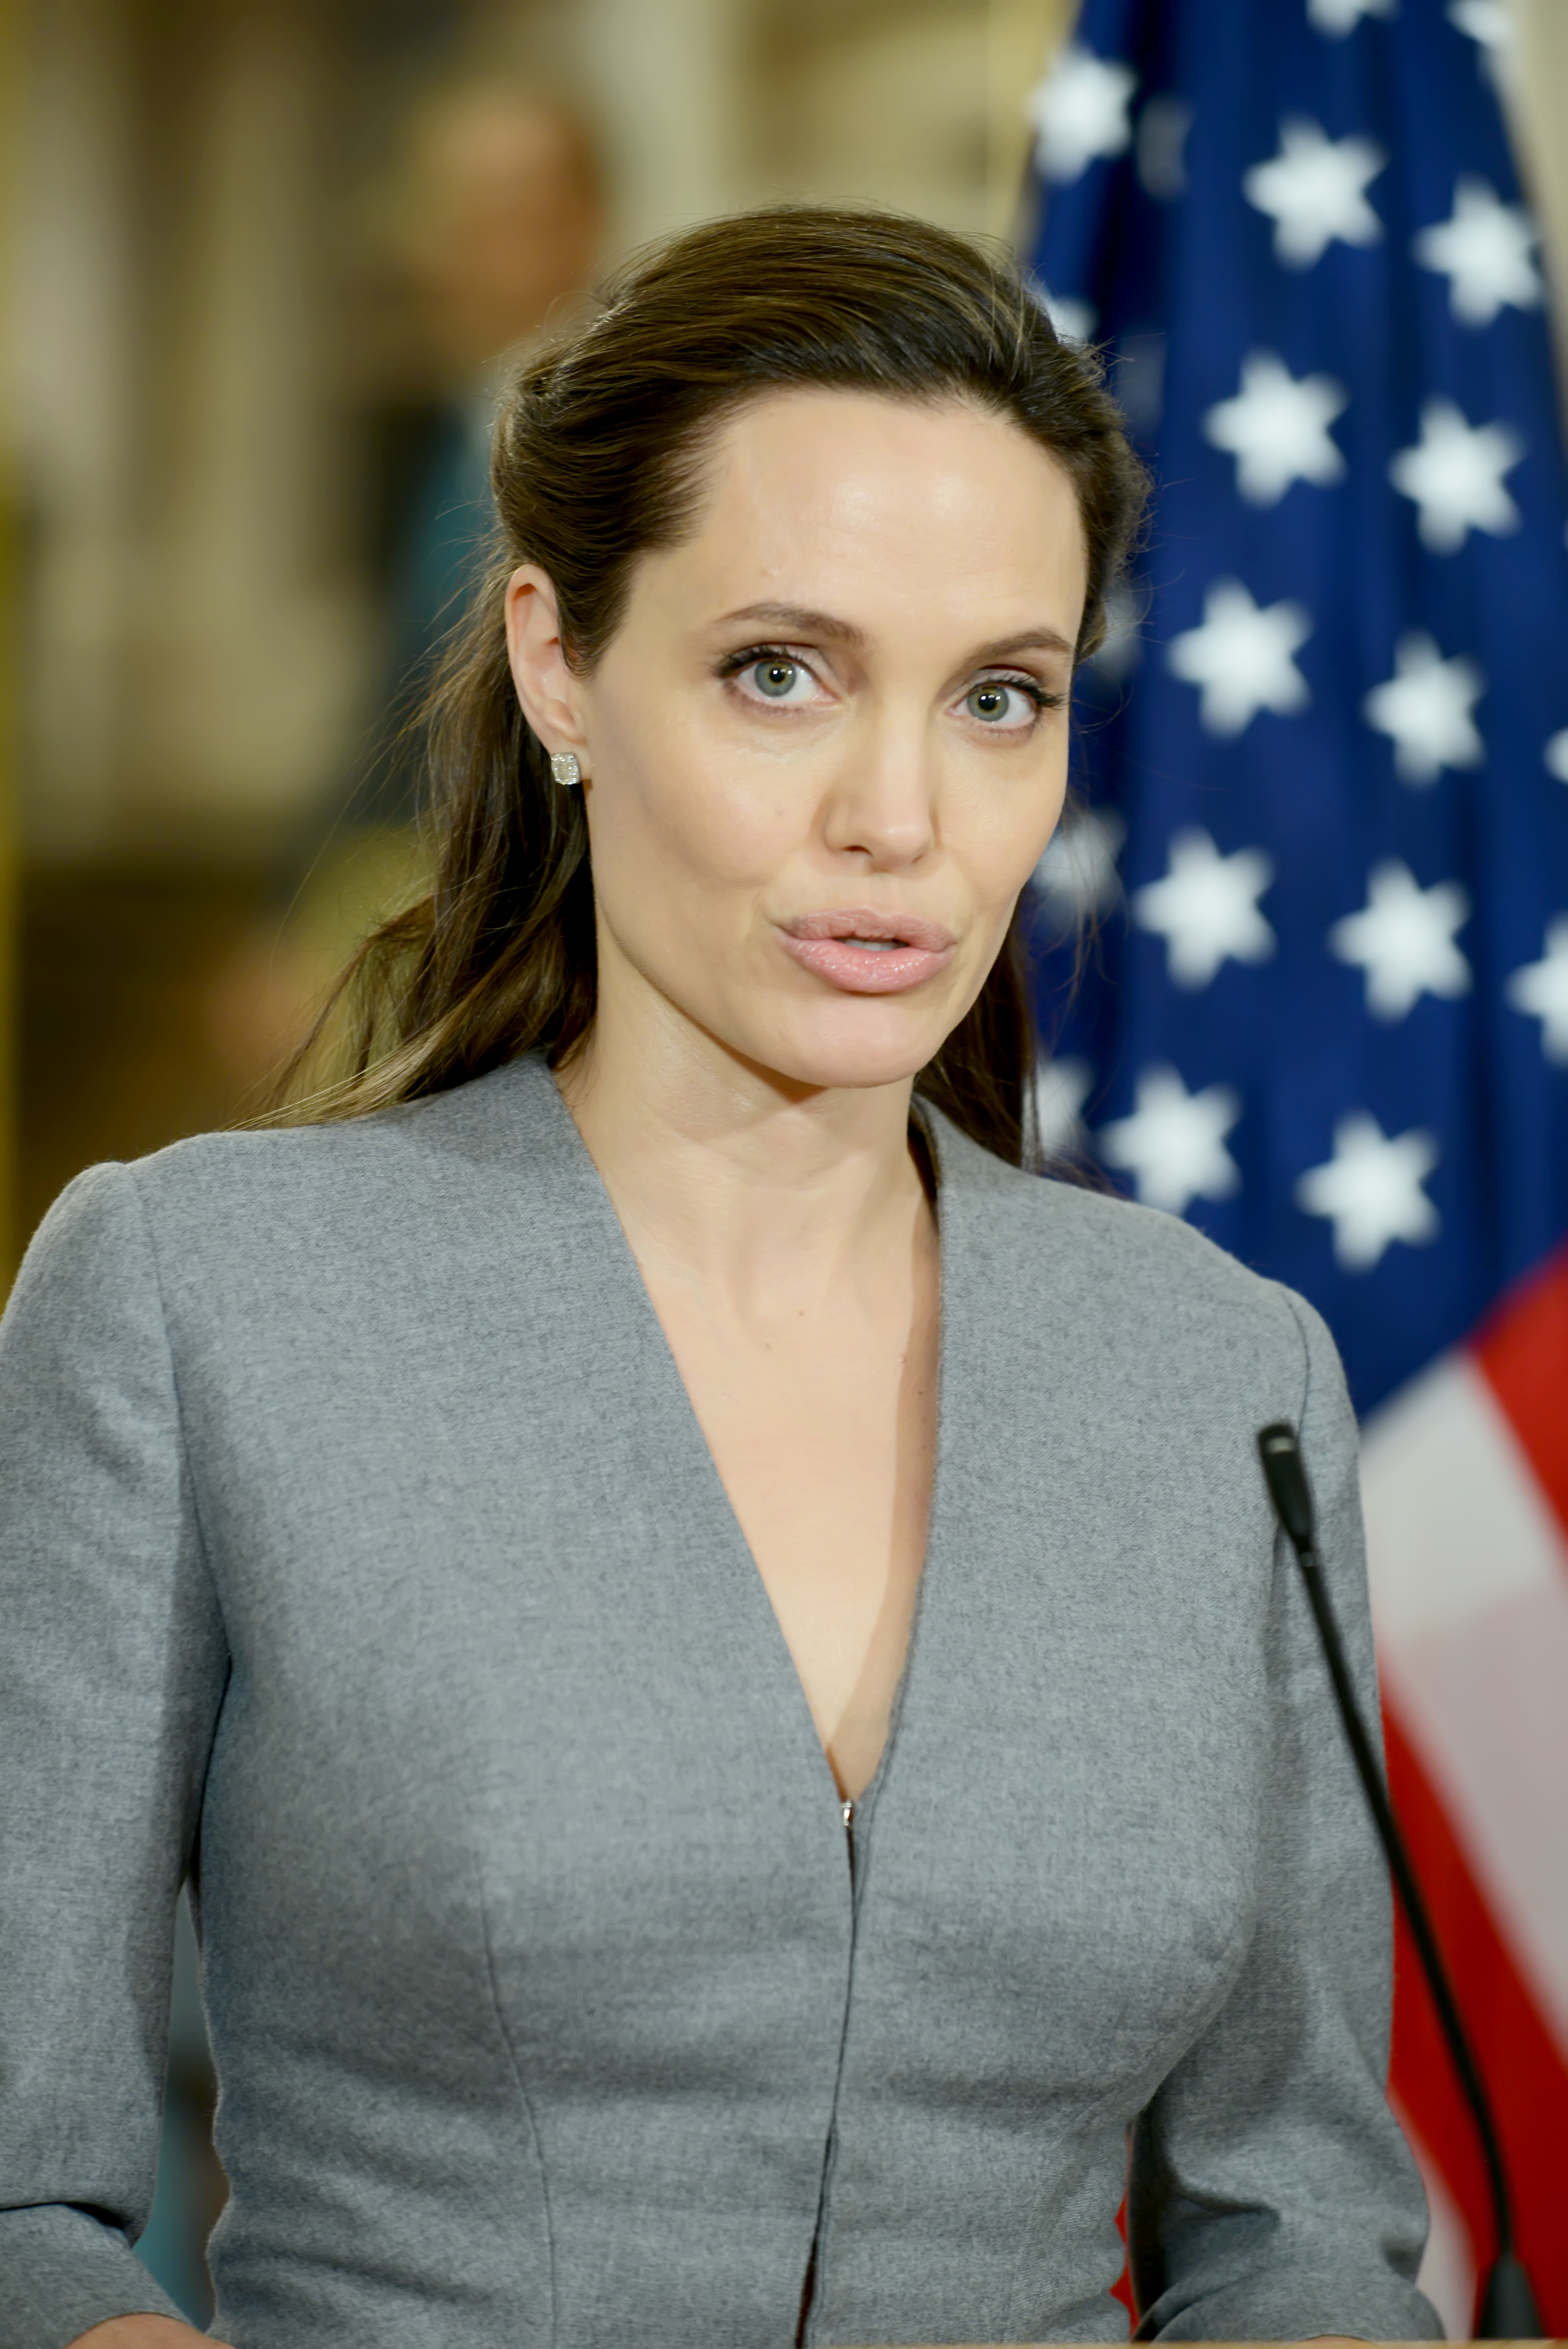 Angelina Jolie speaking at the UN High Commissioner For Refugees Special Envoy in June 2016 | Source: Getty Images